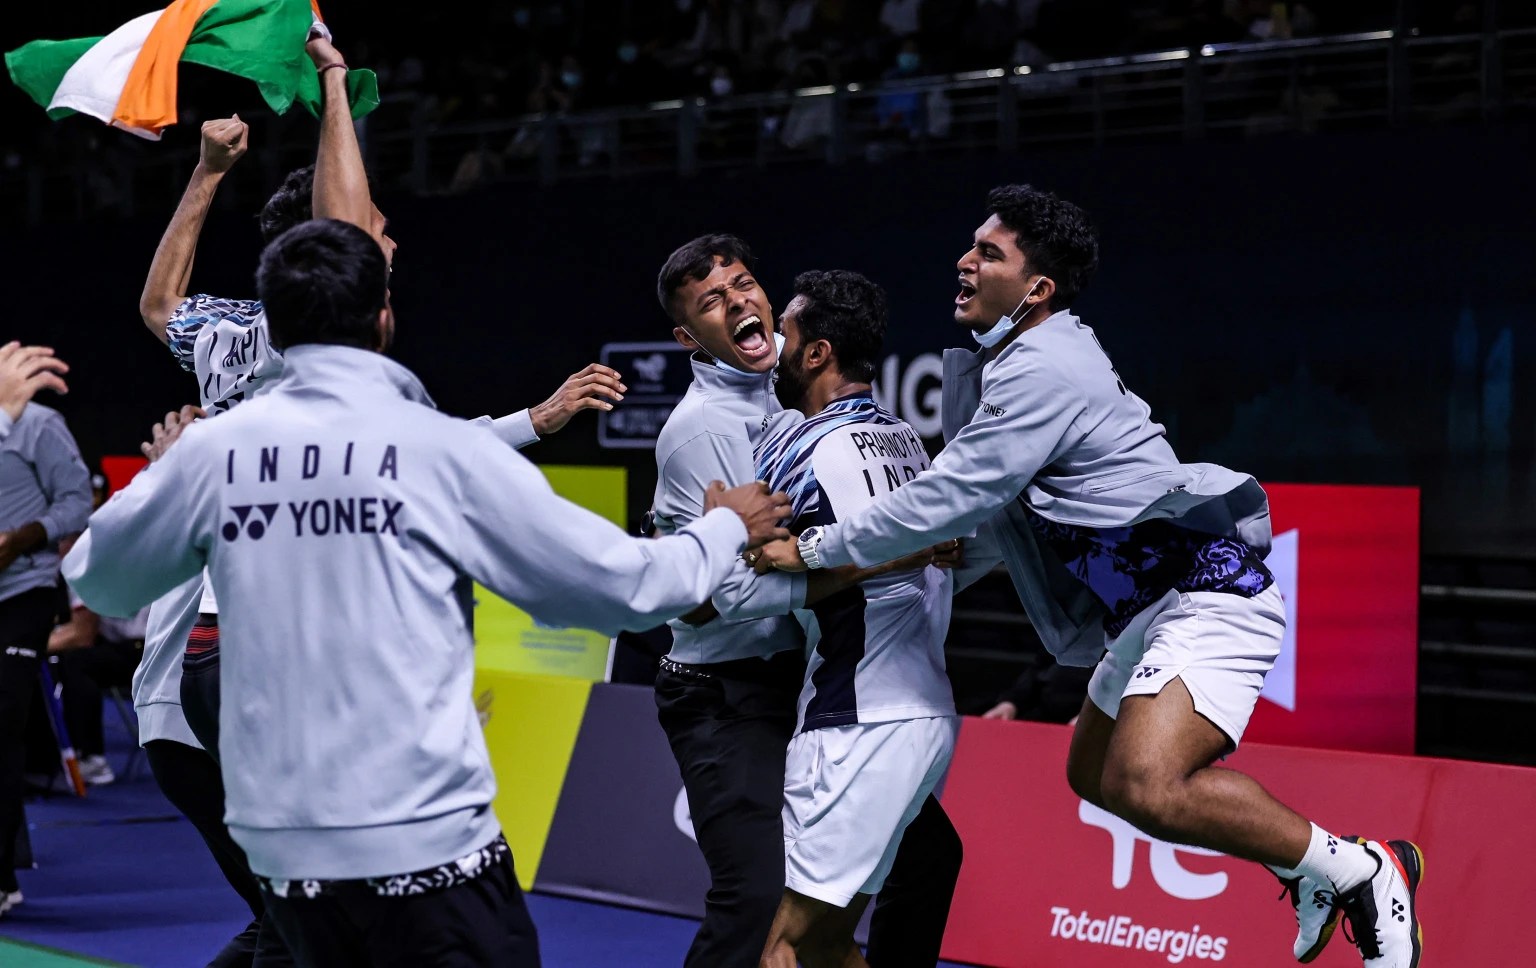 Thomas Cup Semifinals LIVE: India creates history, defeats Denmark 3-2 to make first-ever appearance in Thomas Cup Final